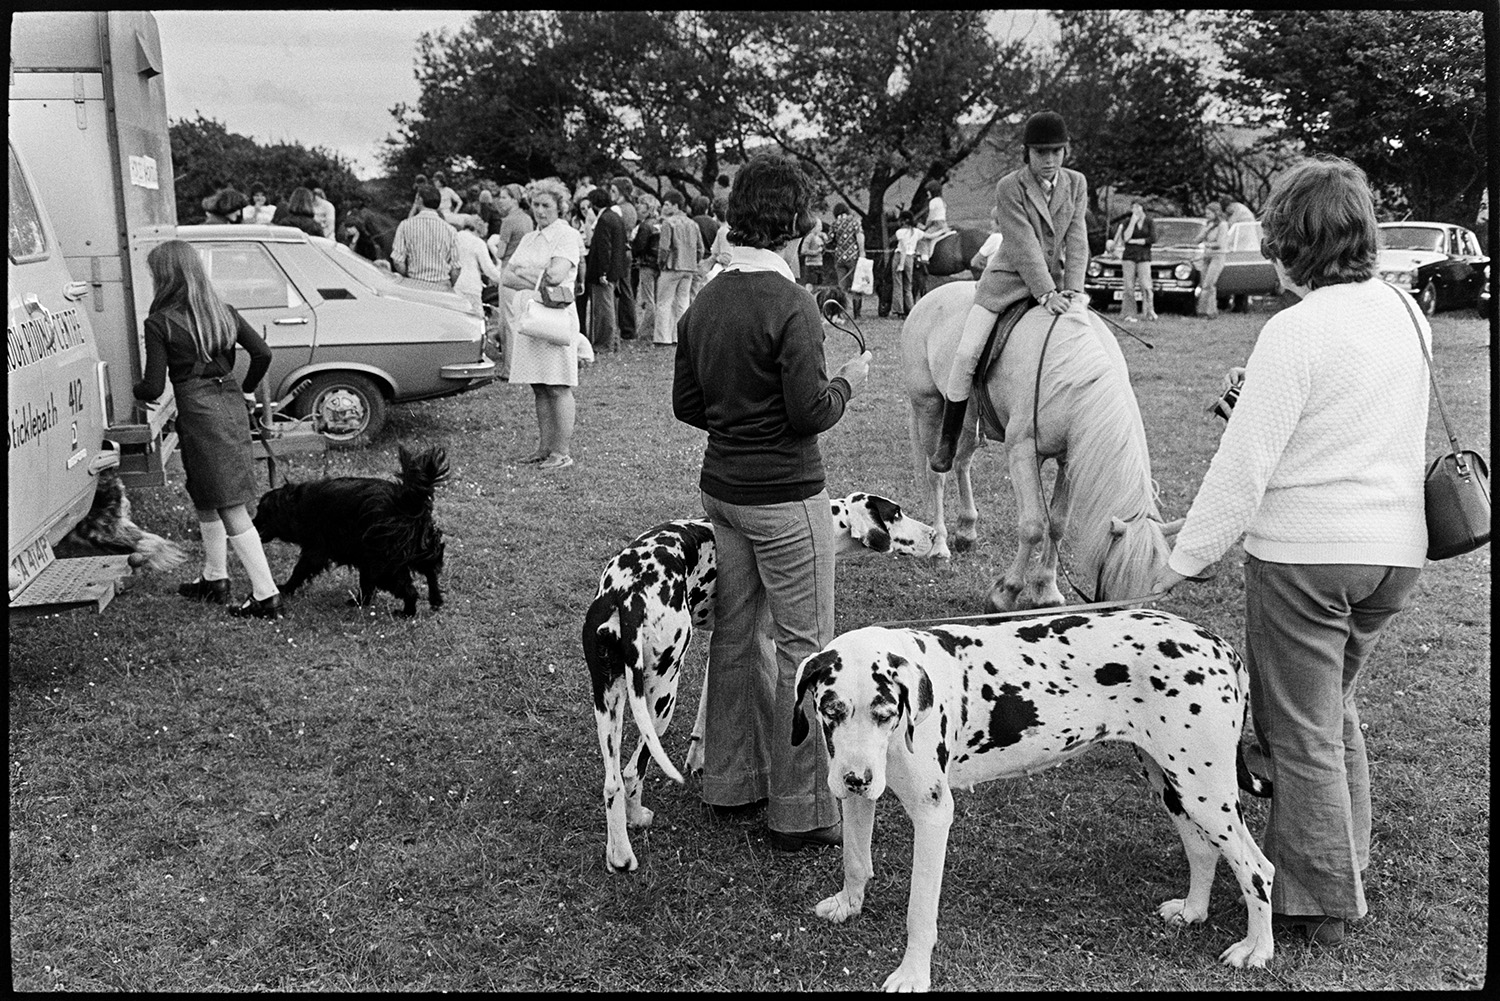 Dogs and horses at gymkhana. 
[Two people with Dalmatians talking to a mounted horse rider at Belstone Gymkhana. Spectators and another dog owner are visible in the background.]